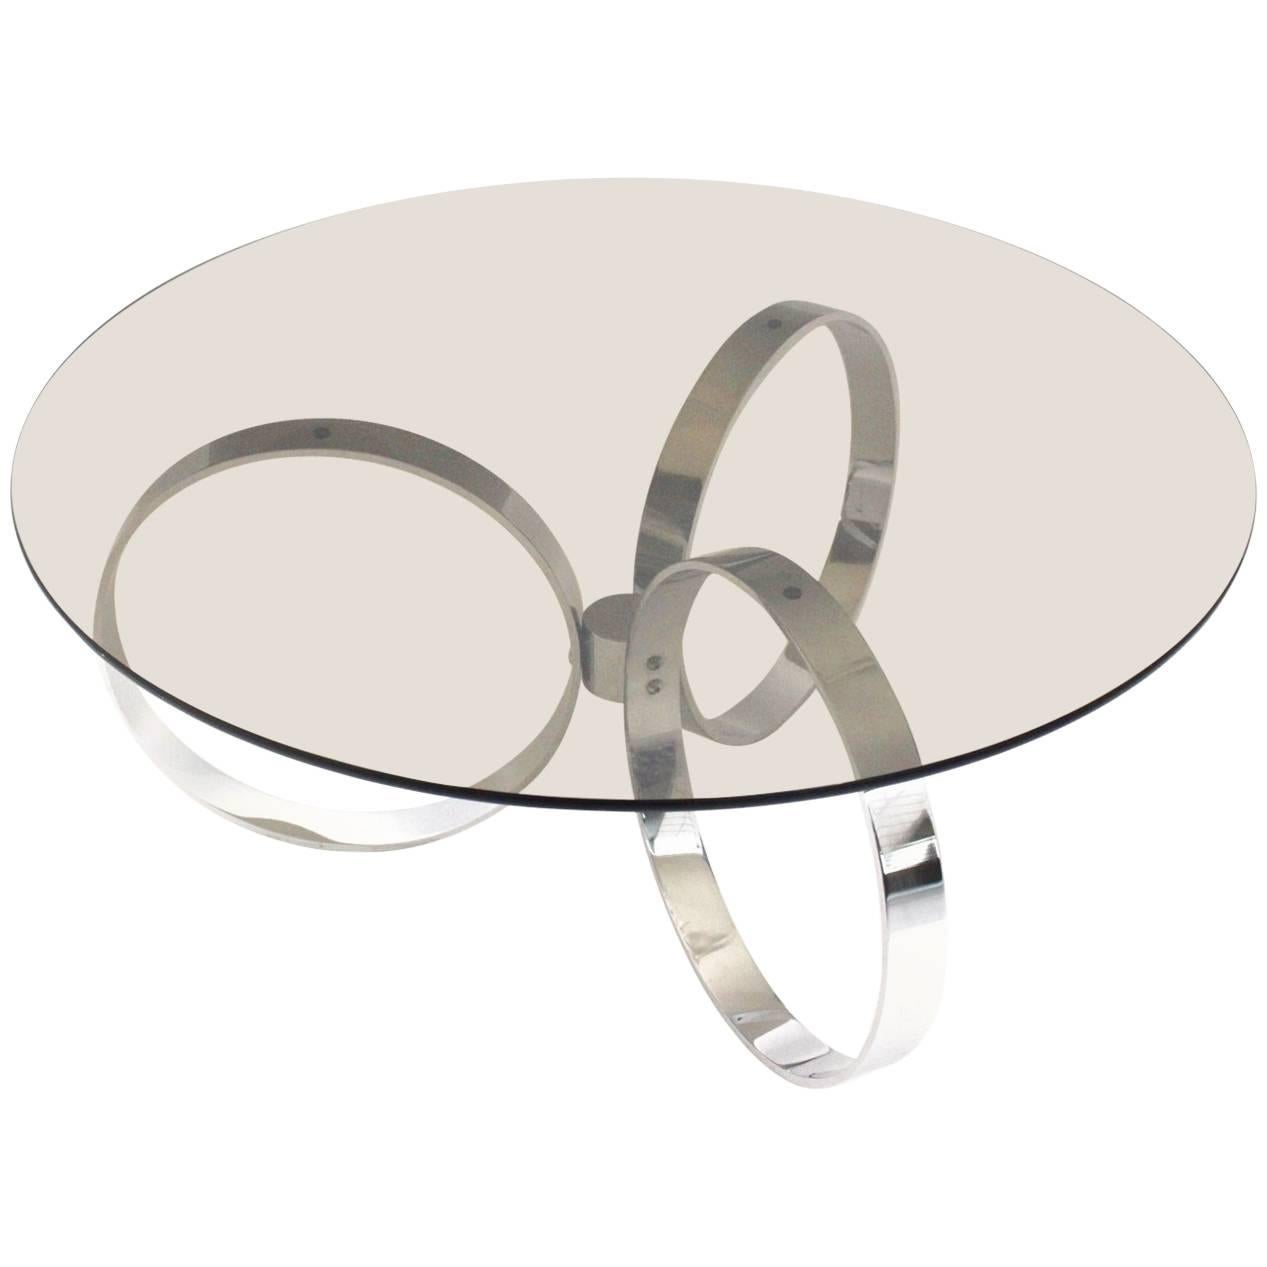 Modernist Chromed Vintage Coffee Table with Three Rings, 1970s For Sale